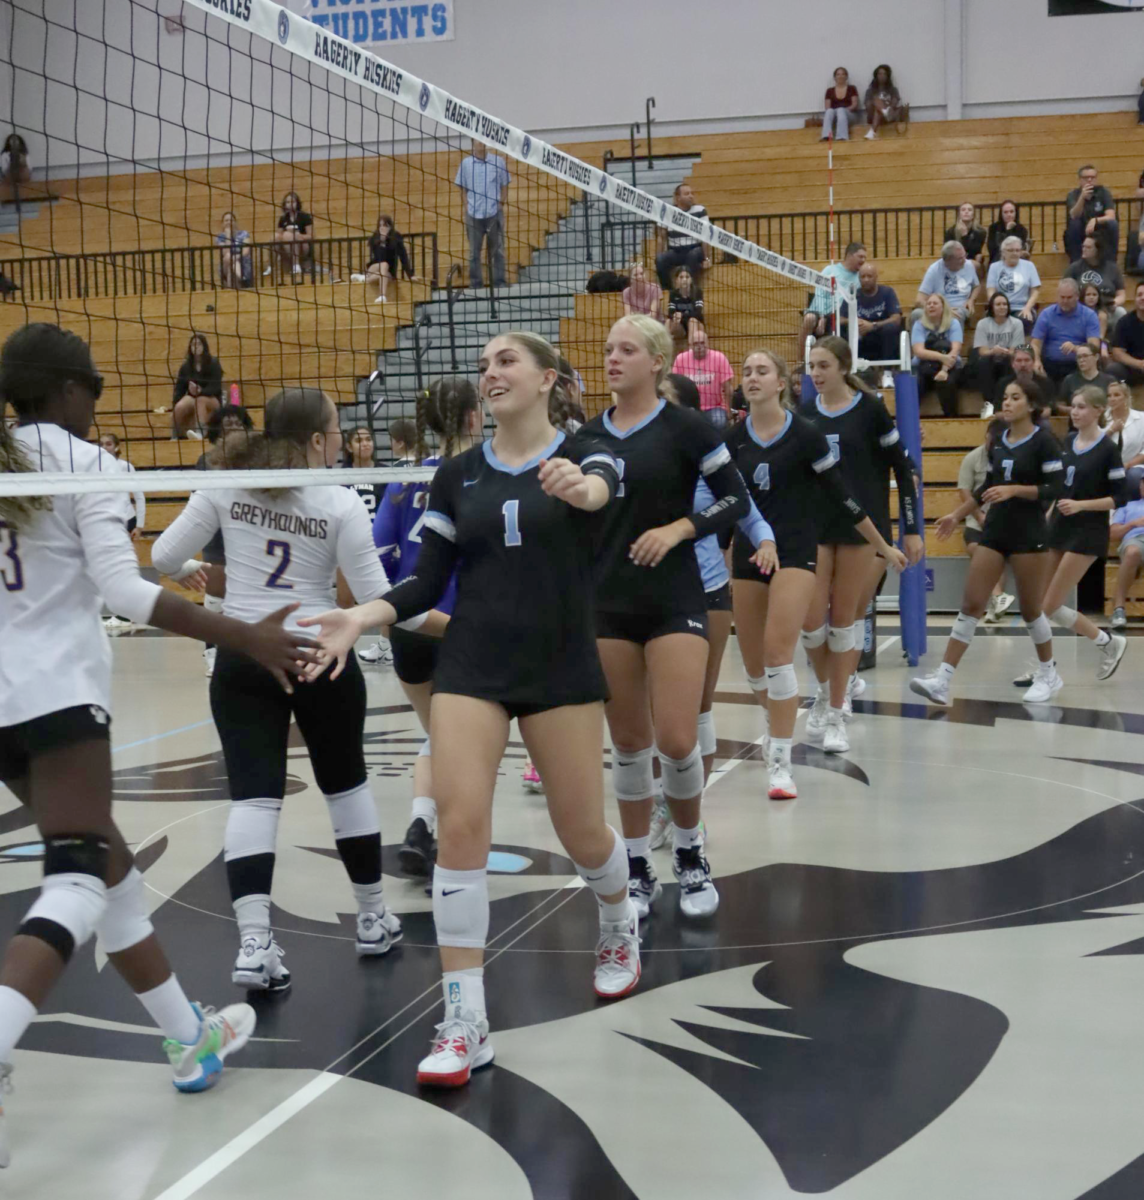 The team gives Lyman handshakes before the game starts. Hagerty won the match with a clean sweep, 3-0.